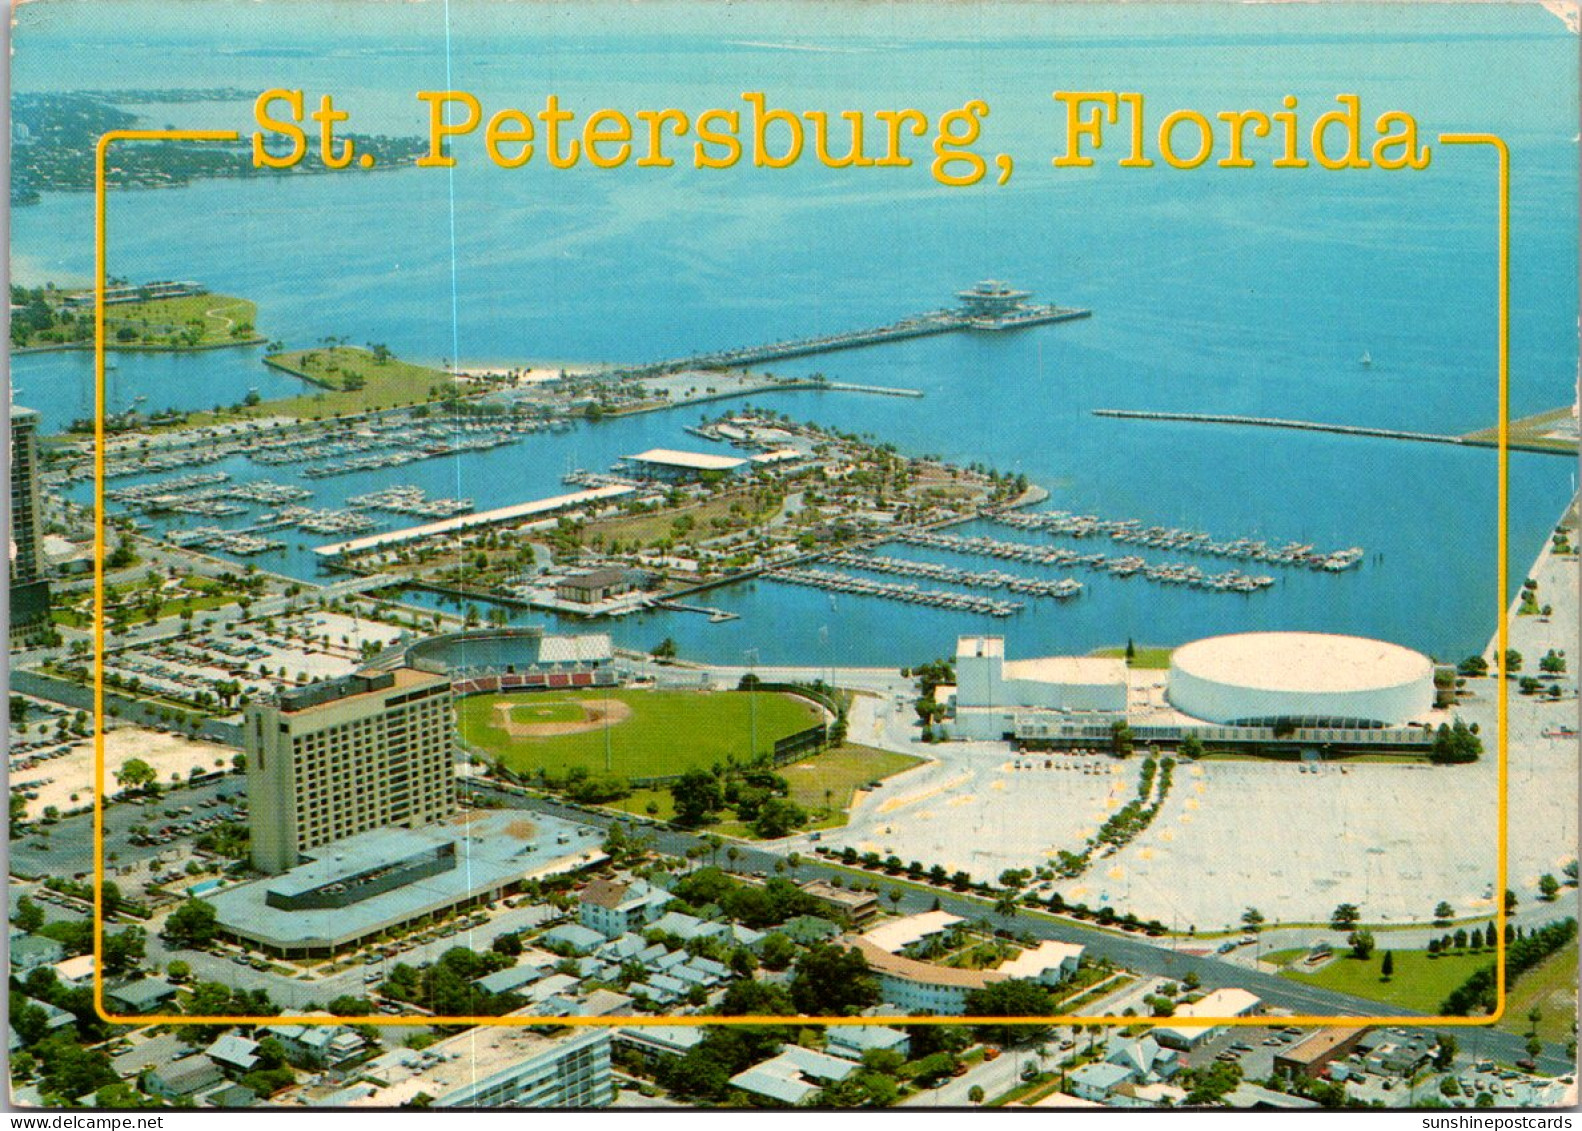 Florida St Petersburg Aerial View Showing Downtown With Marina And Pier - St Petersburg